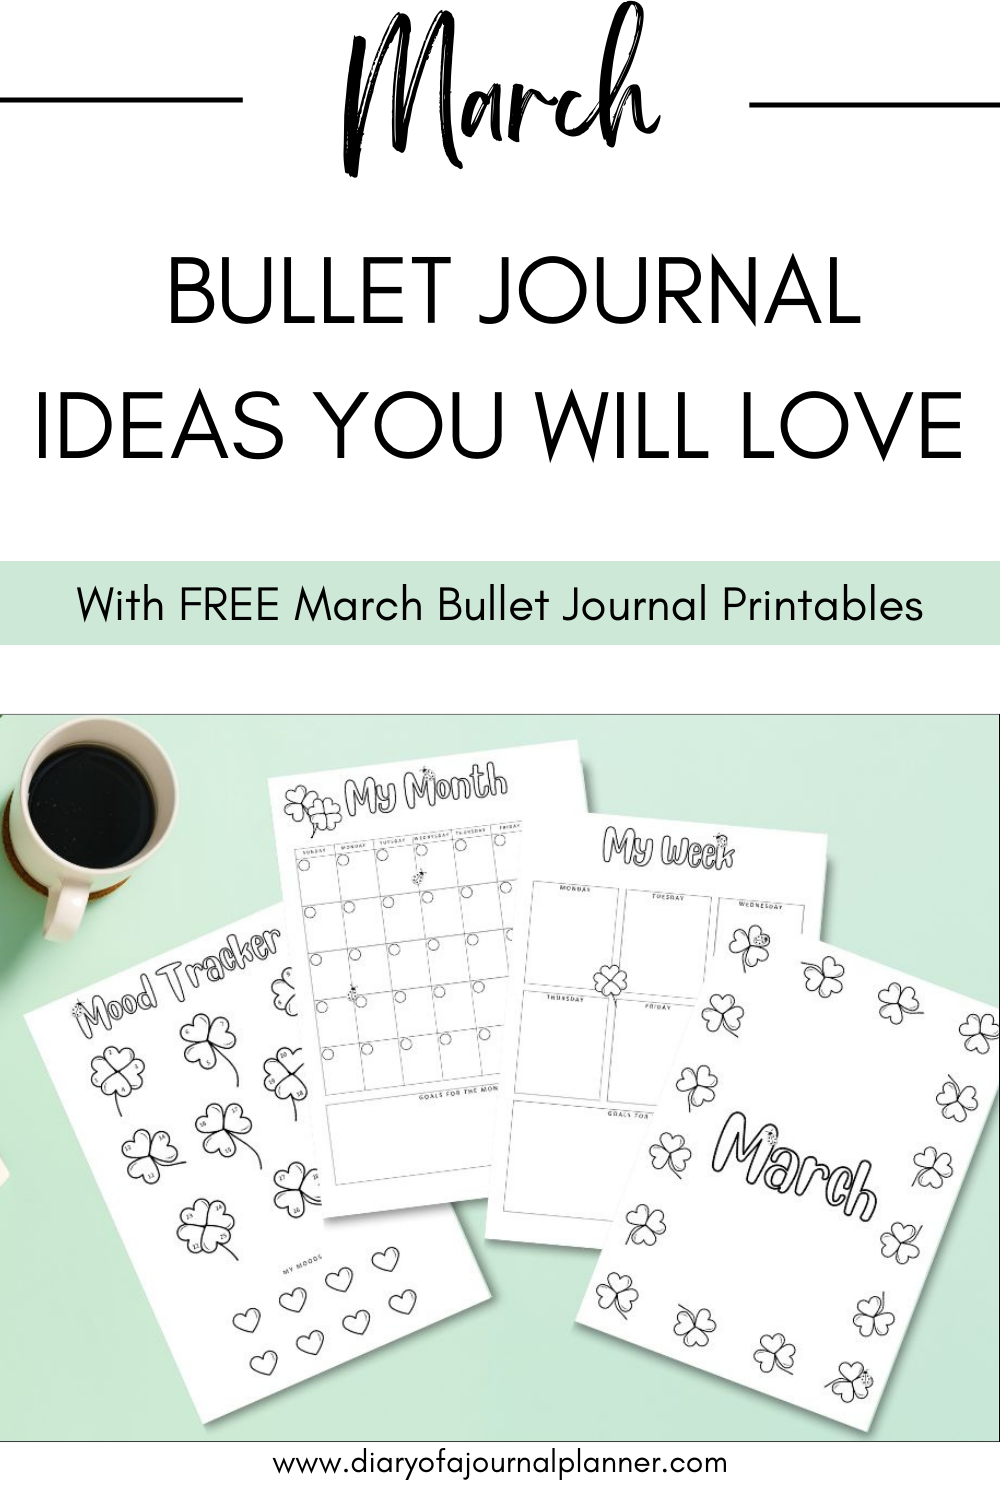 Bullet Journal ideas for March